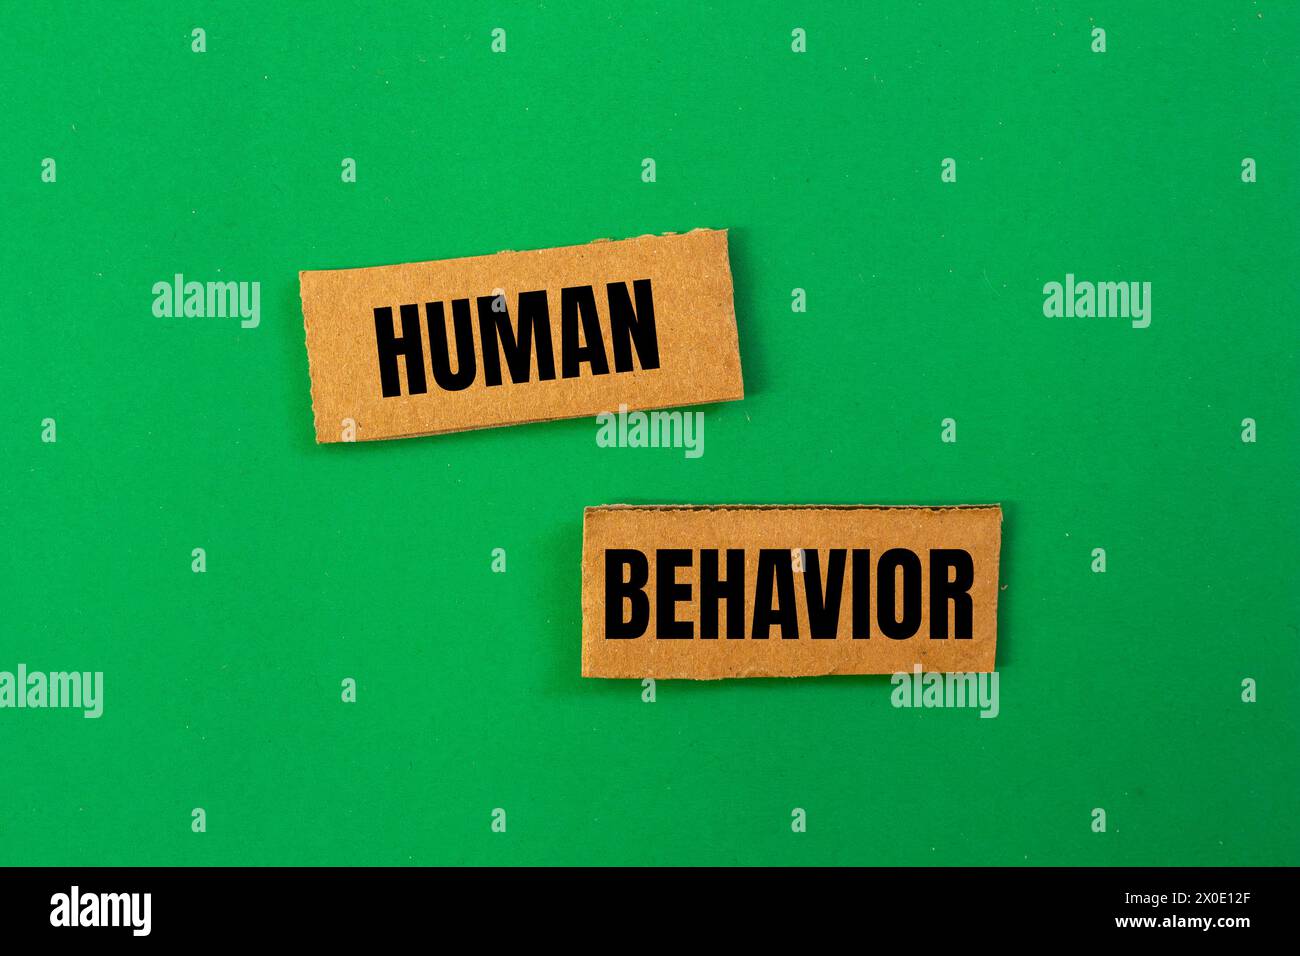 Human behavior words written on paper pieces with green background. Conceptual symbol. Copy space. Stock Photo